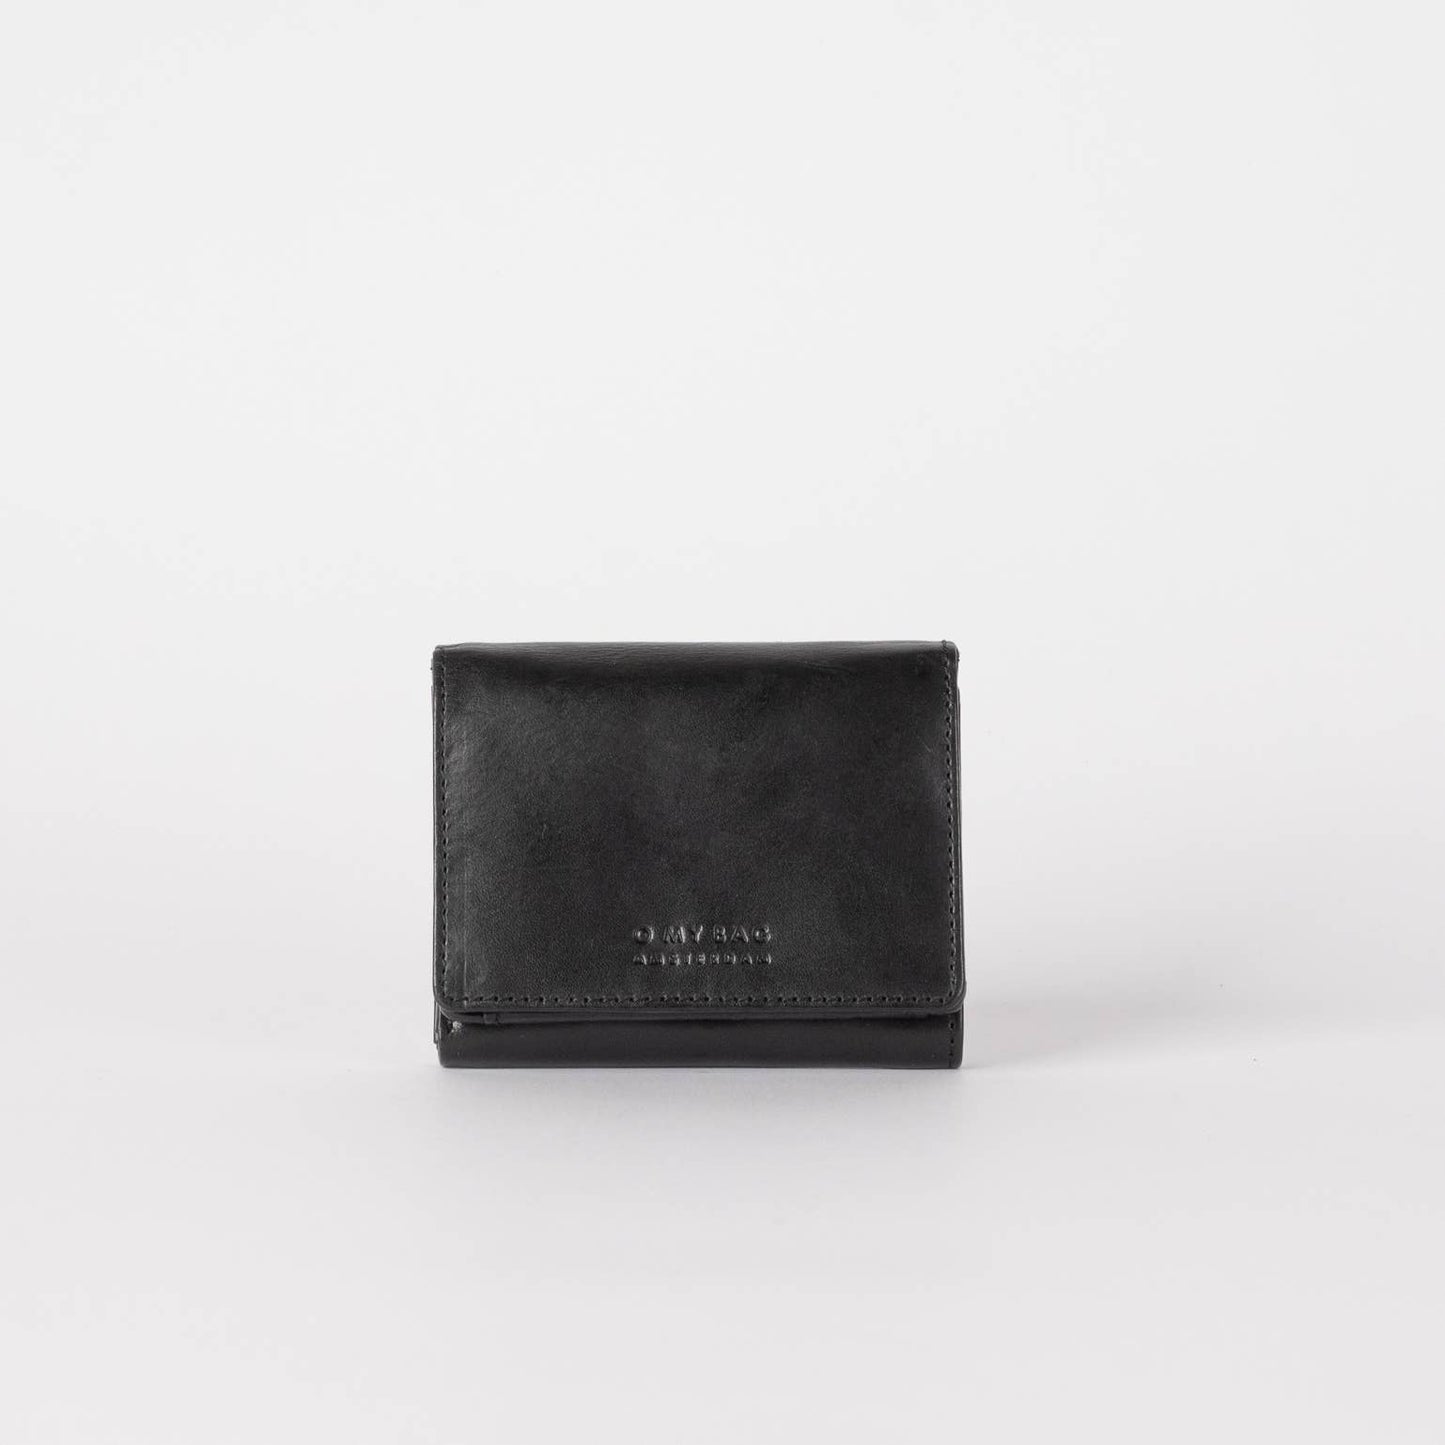 Ollie Wallet - Black Classic Leather